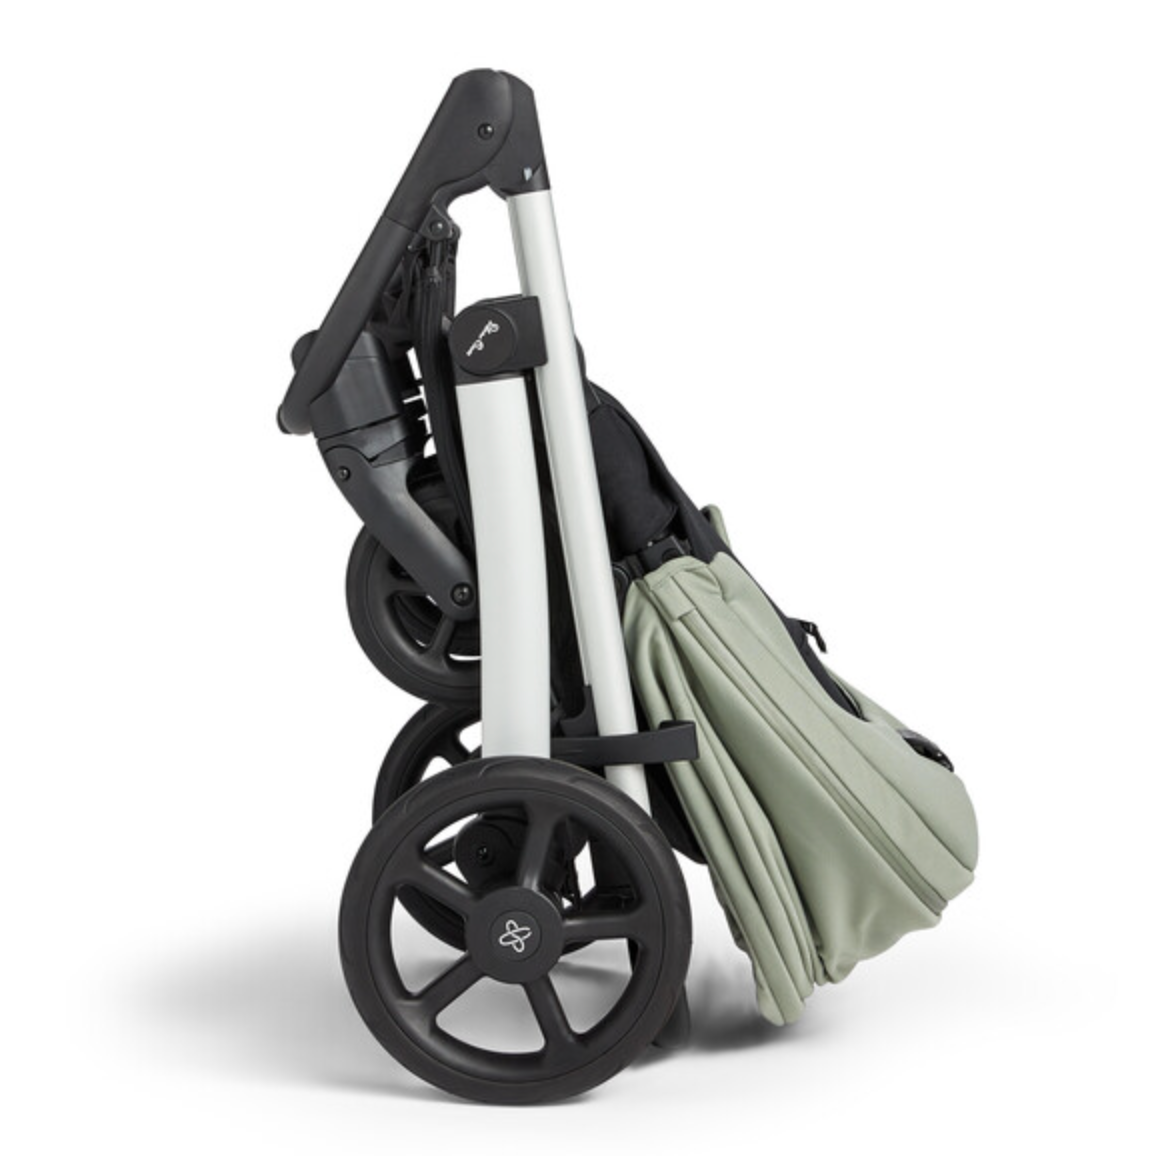 Silver Cross Tide Pushchair, Dream i-Size & Accessory Bundle | Sage - Silver Chassis